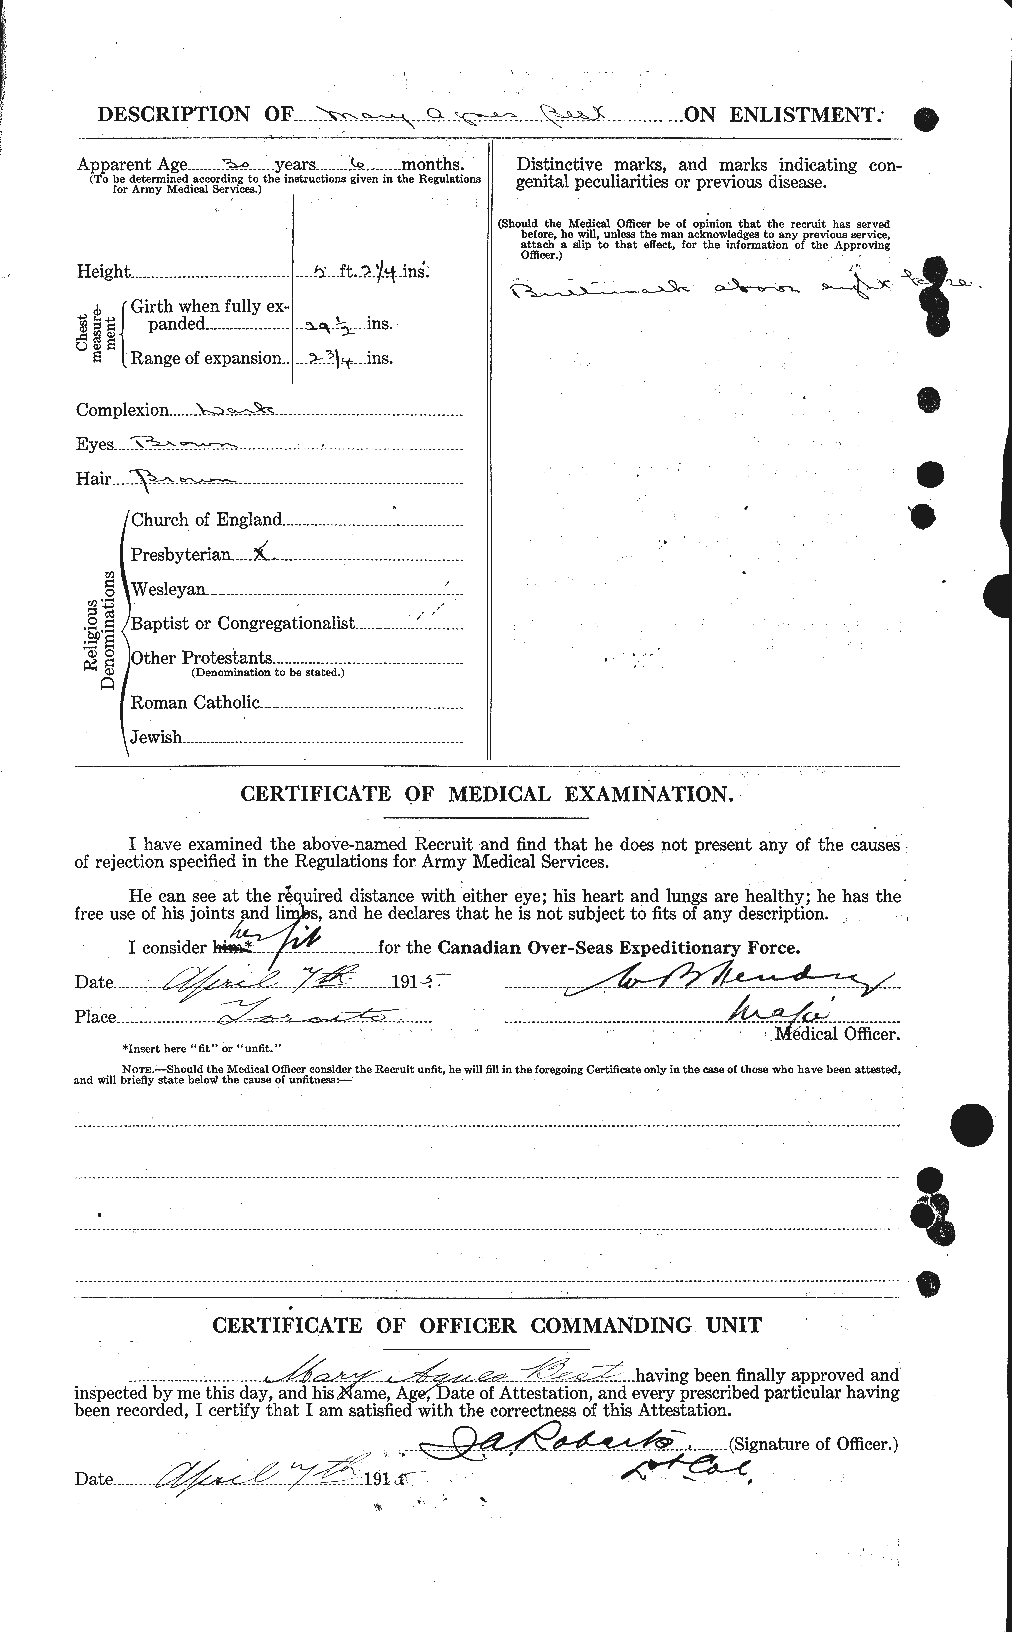 Personnel Records of the First World War - CEF 240310b